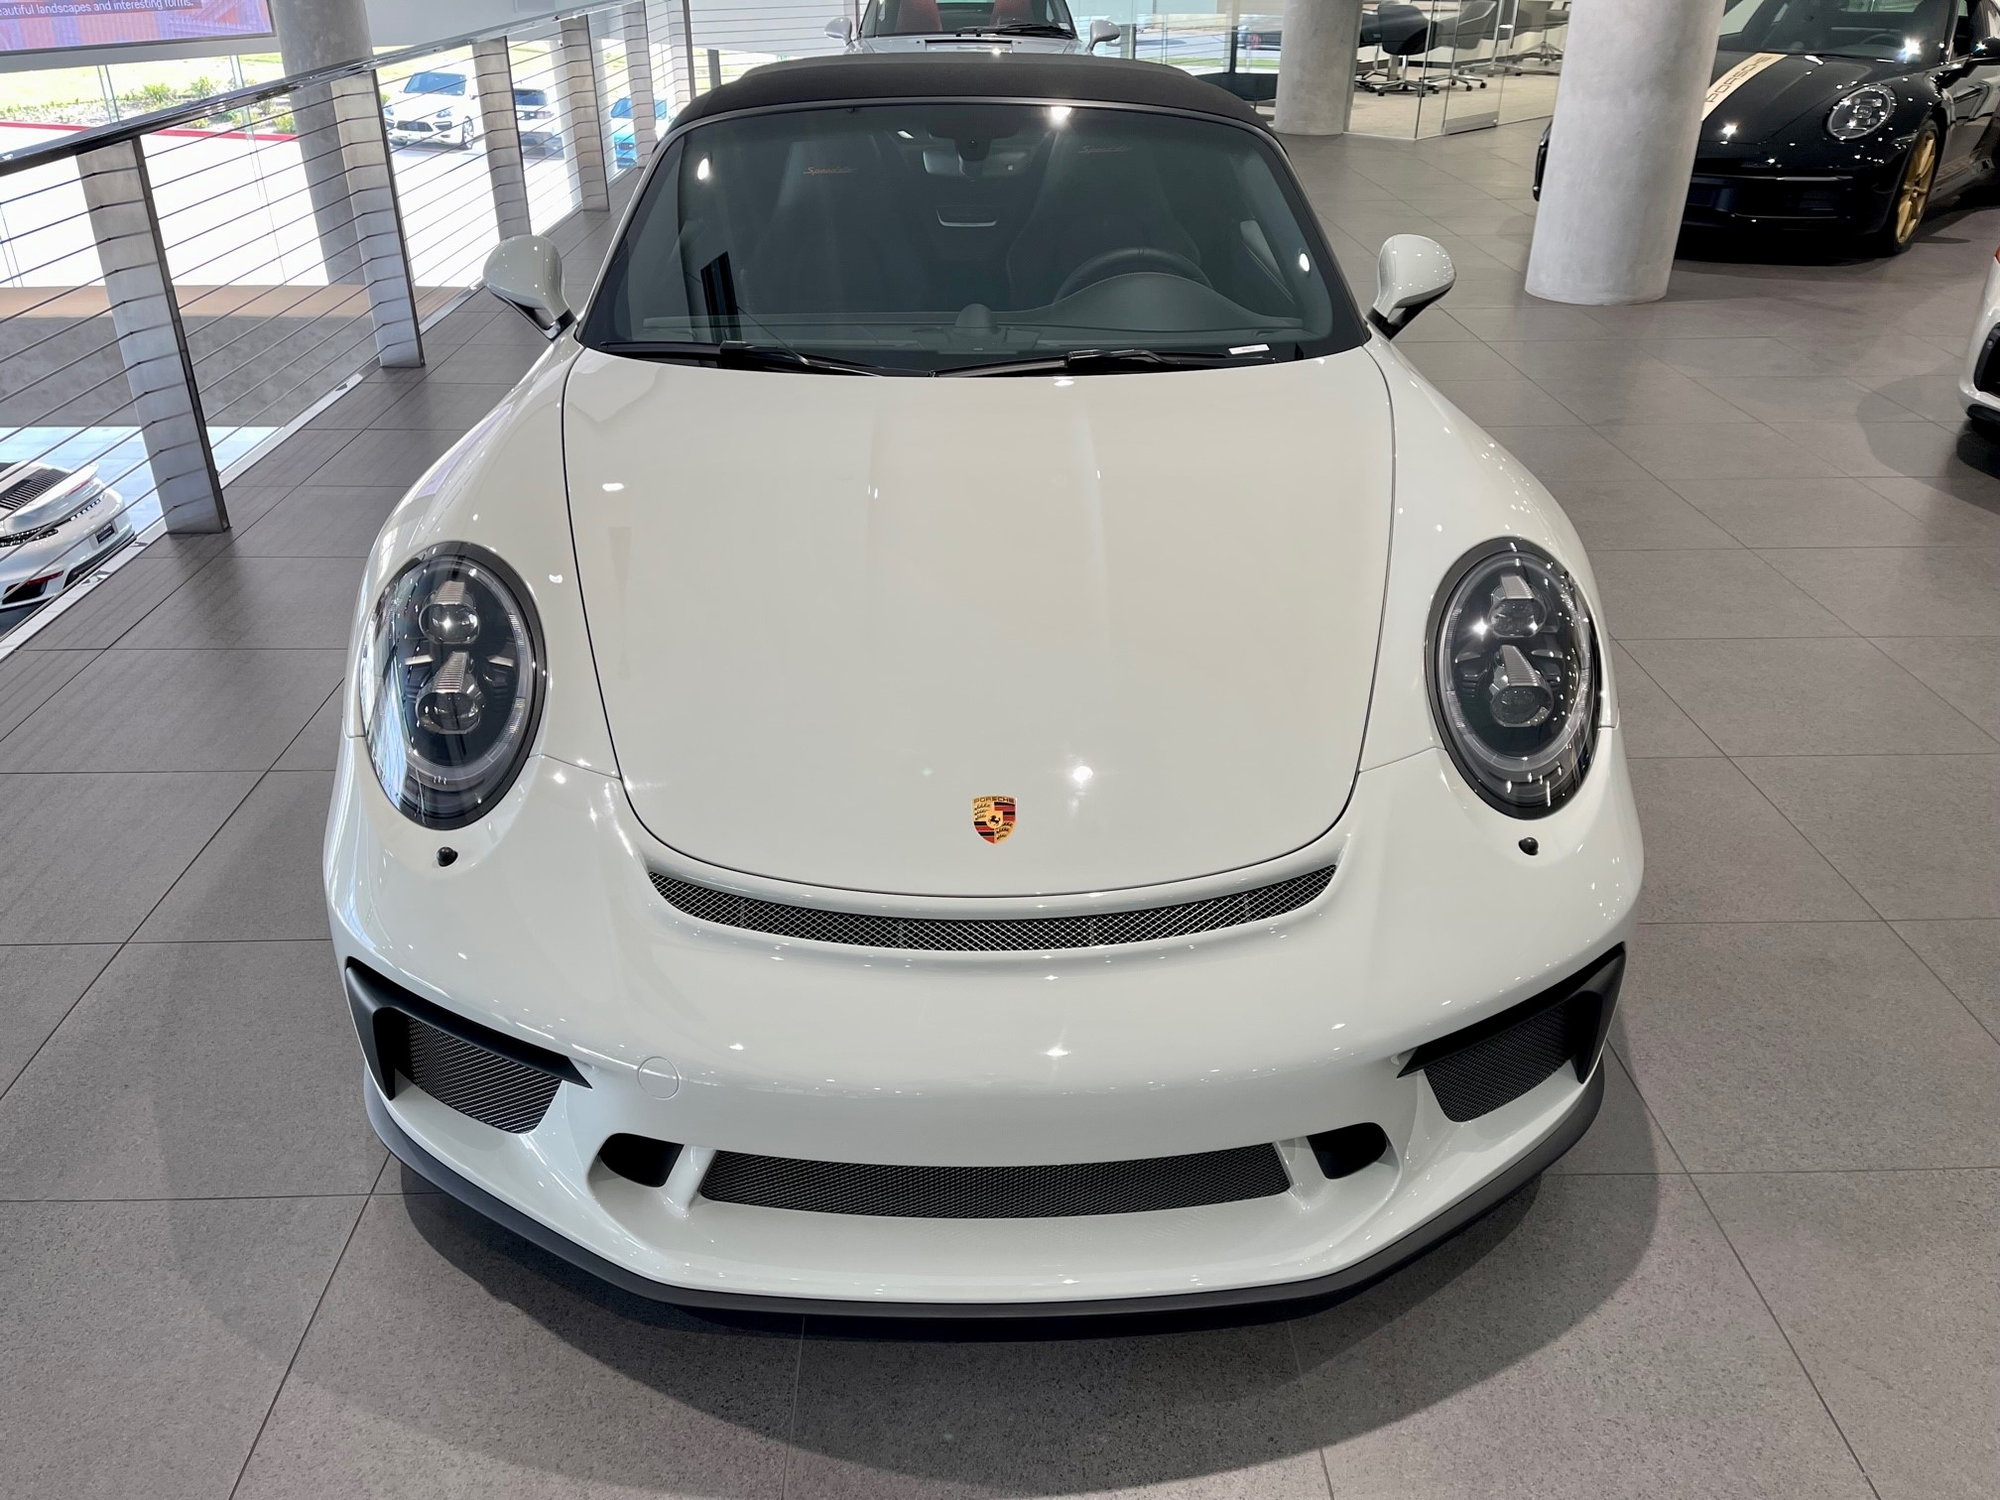 2019 Porsche 911 - 2019 911 Speedster PTS Dolphin Grey CPO Delivery Miles - Used - Austin, TX 78759, United States